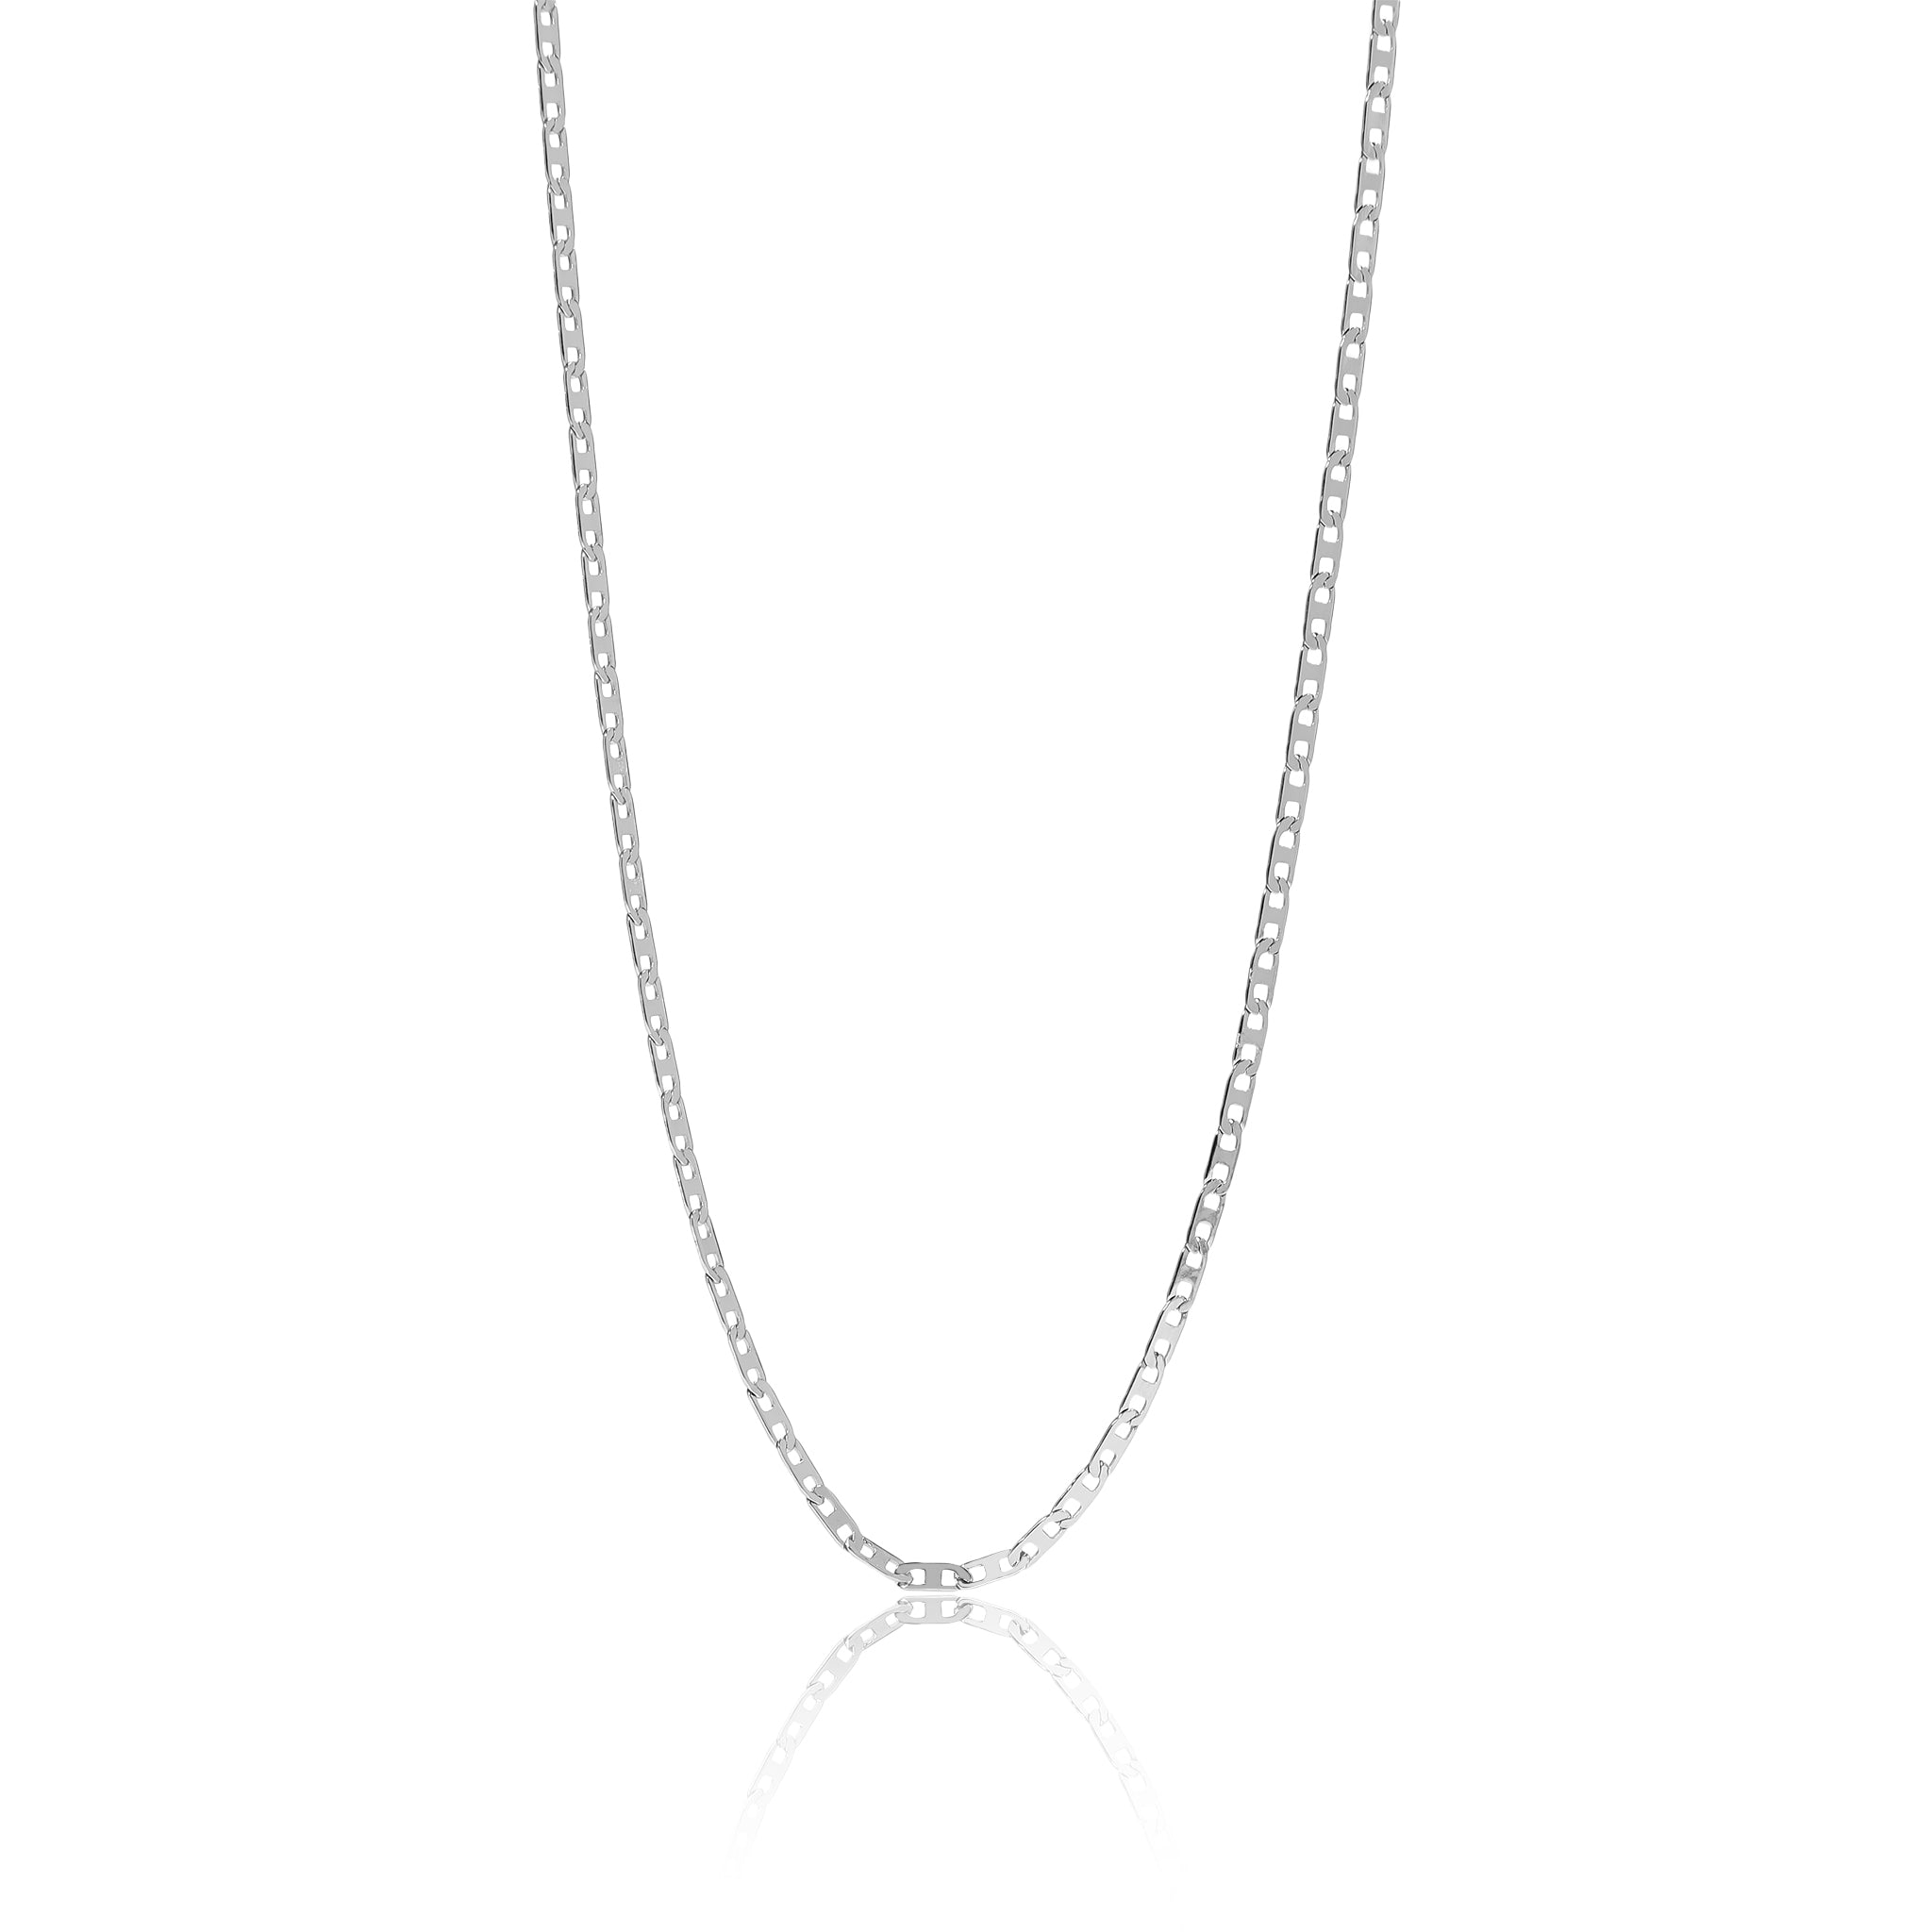 Stainless Steel Necklace / DIS0011